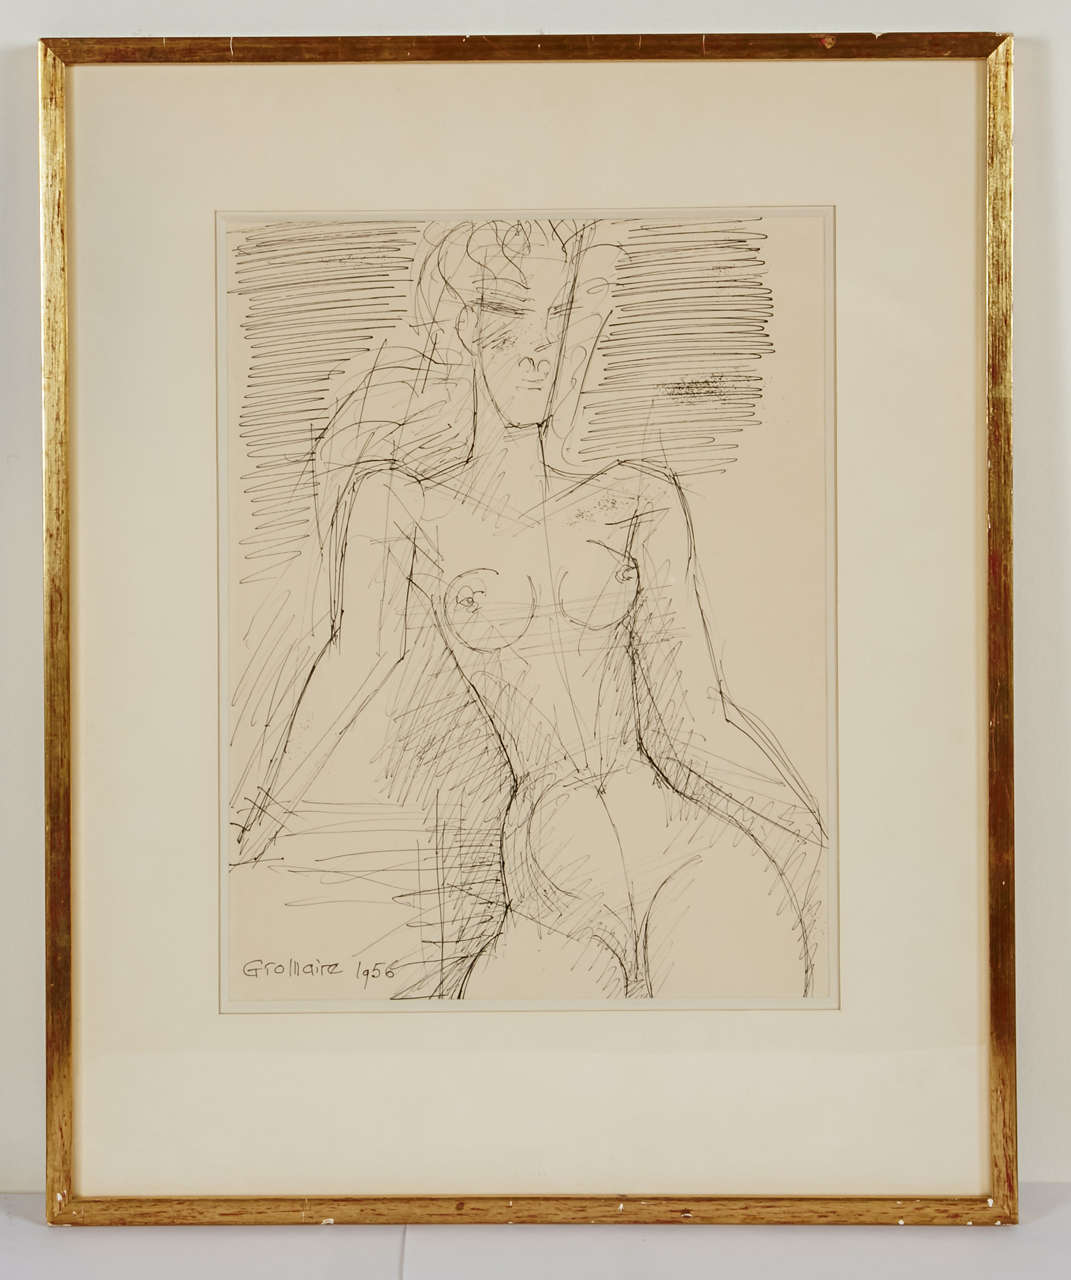 Drawing by Marcel Gromaire (1892 - 1971). Ink drawing signed and dated 'Gromaire 1956' on the bottom left.

Dimensions with frame: 40cm x 49cm.
Dimensions of the visible drawing: 25cm x 33cm.